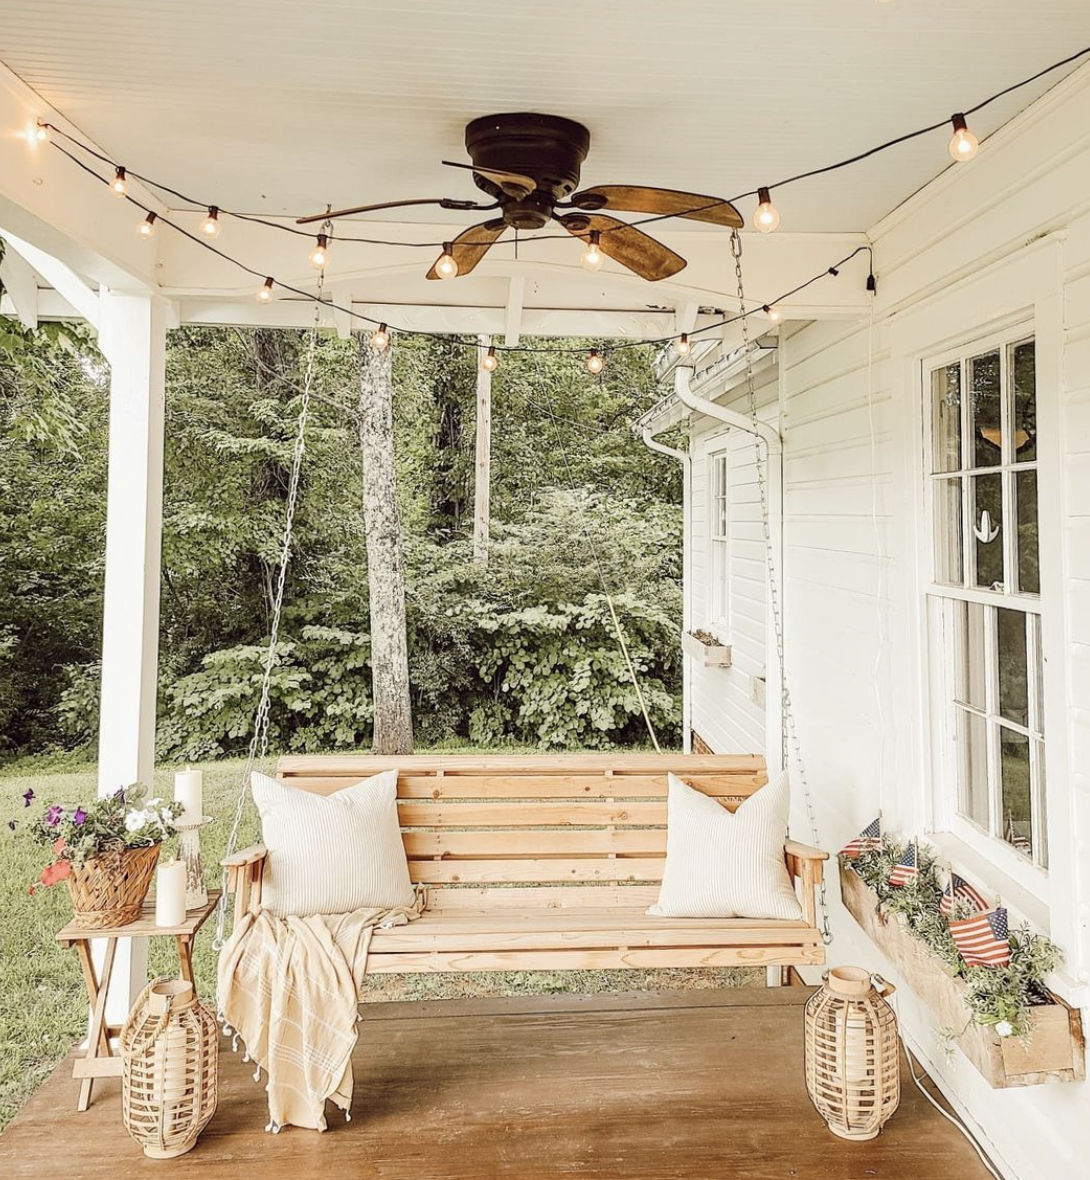 hanging light wood porch patio swing bench with hanging lights ceiling fan white porch